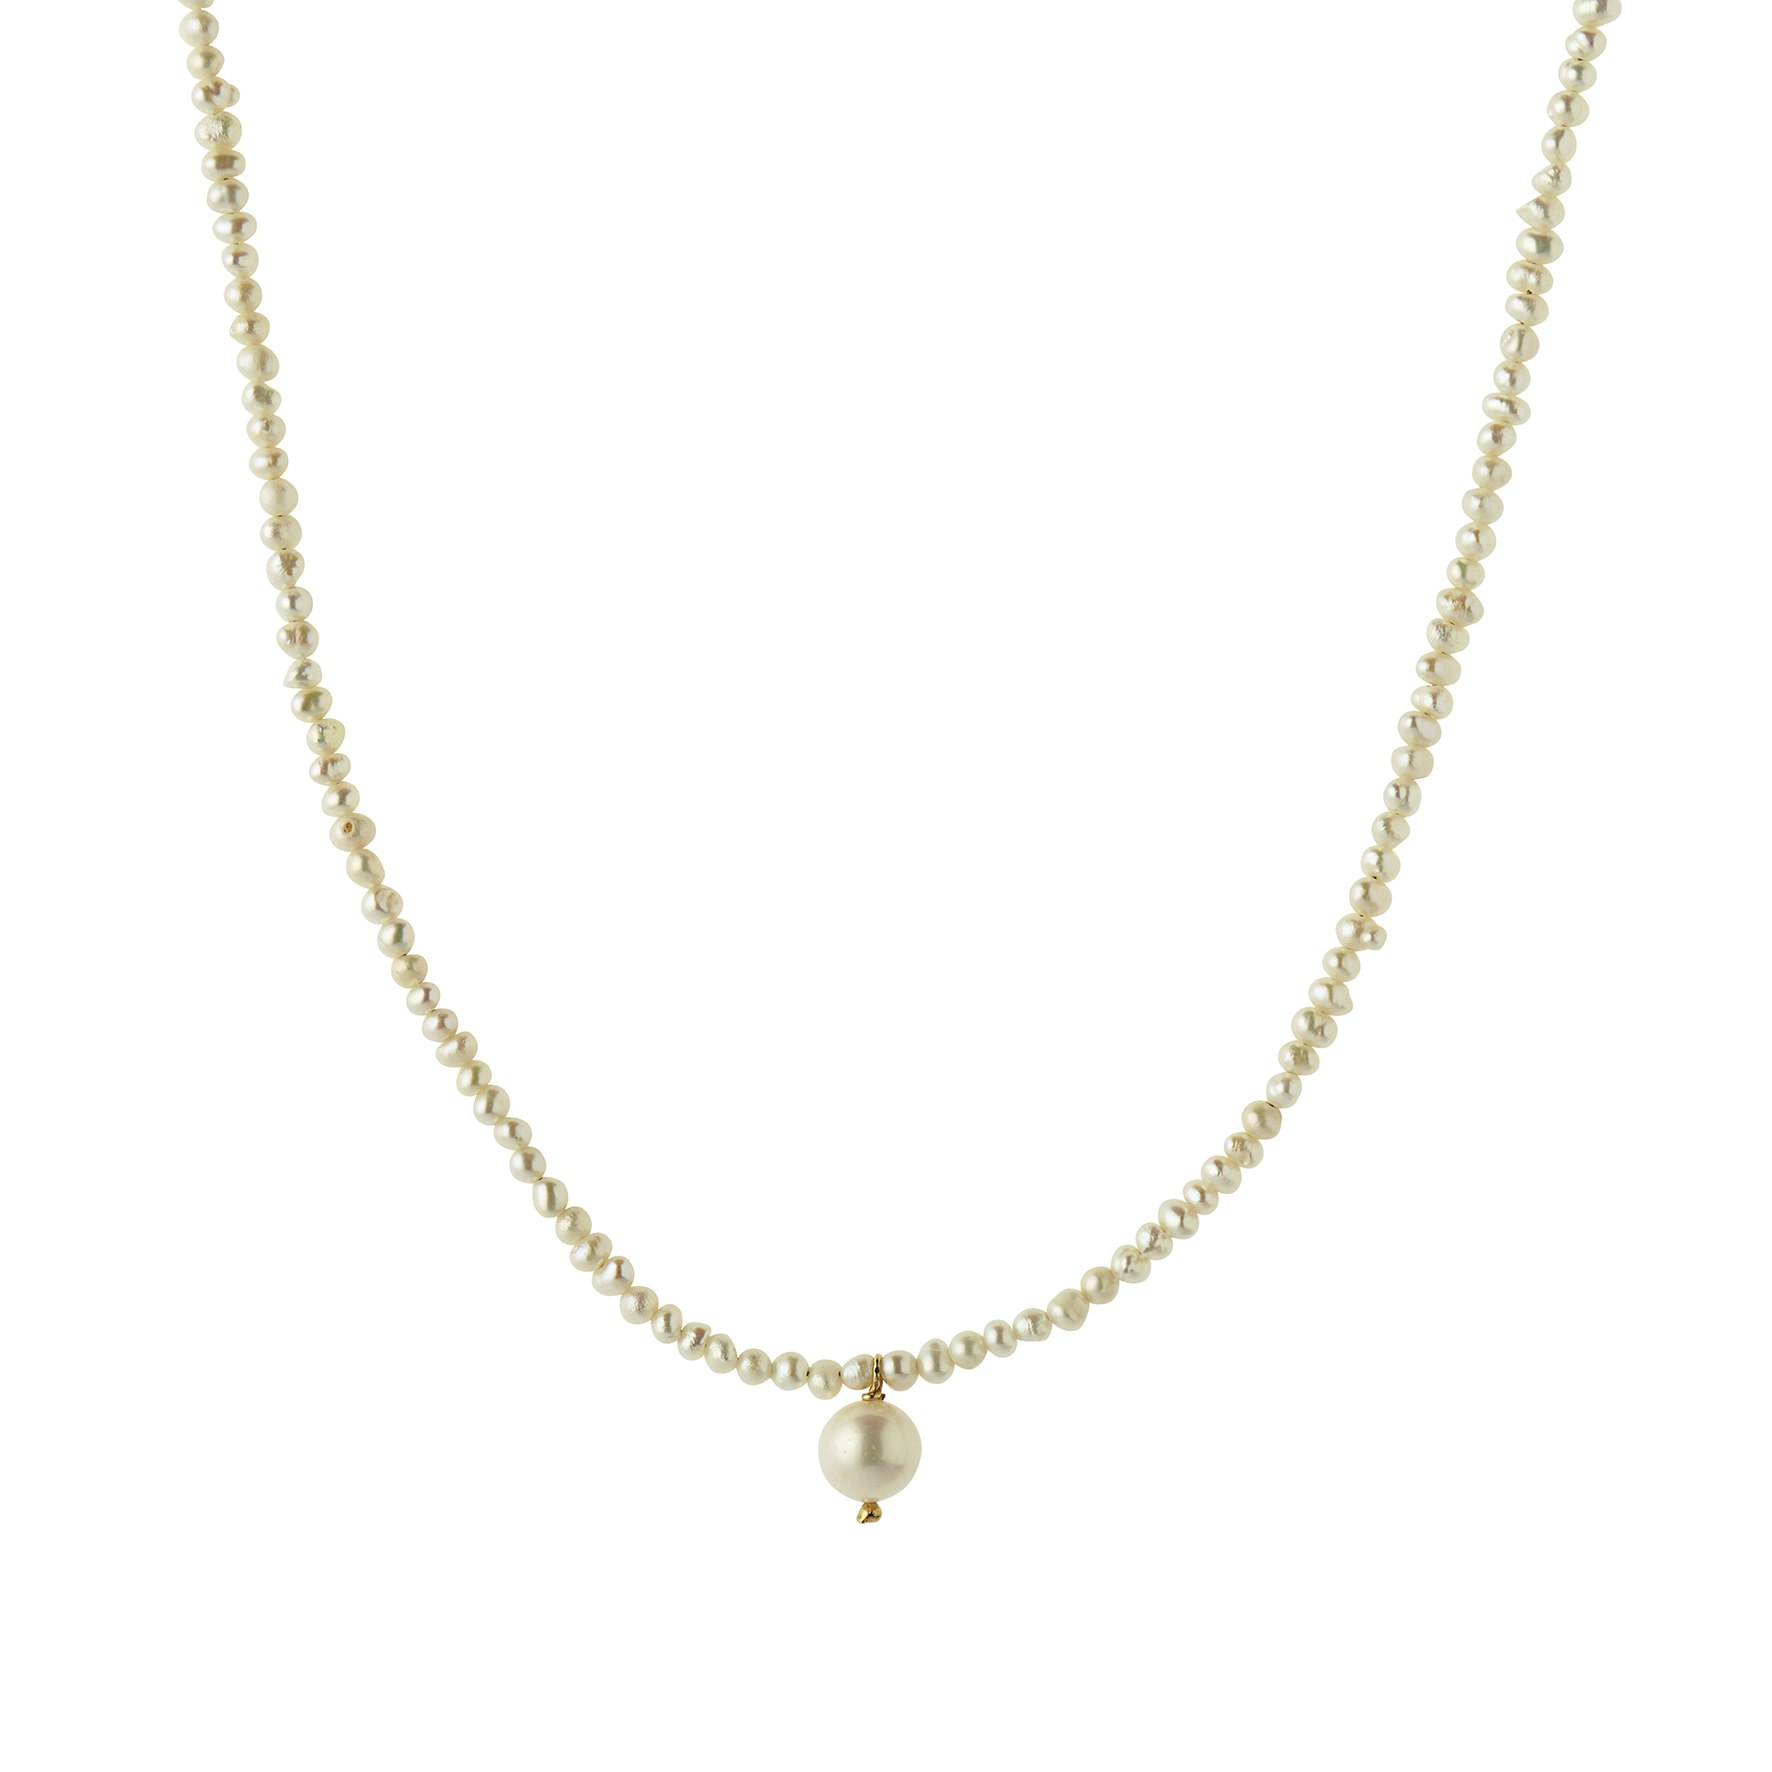 Heavenly Pearl Dream Necklace Classy from STINE A Jewelry in Goldplated Silver Sterling 925